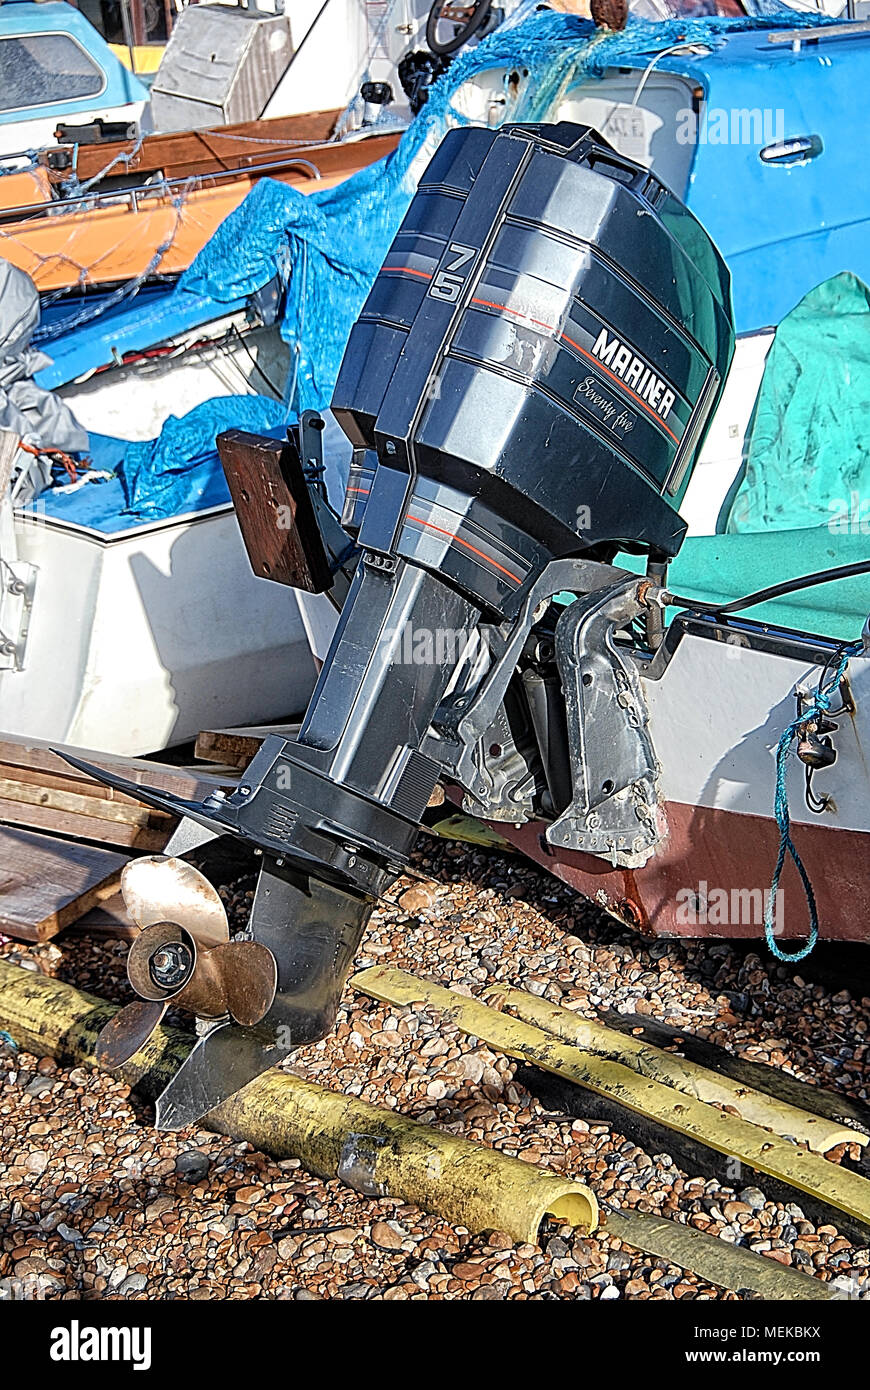 Mariner 75 Outboard Motor Stock Photo